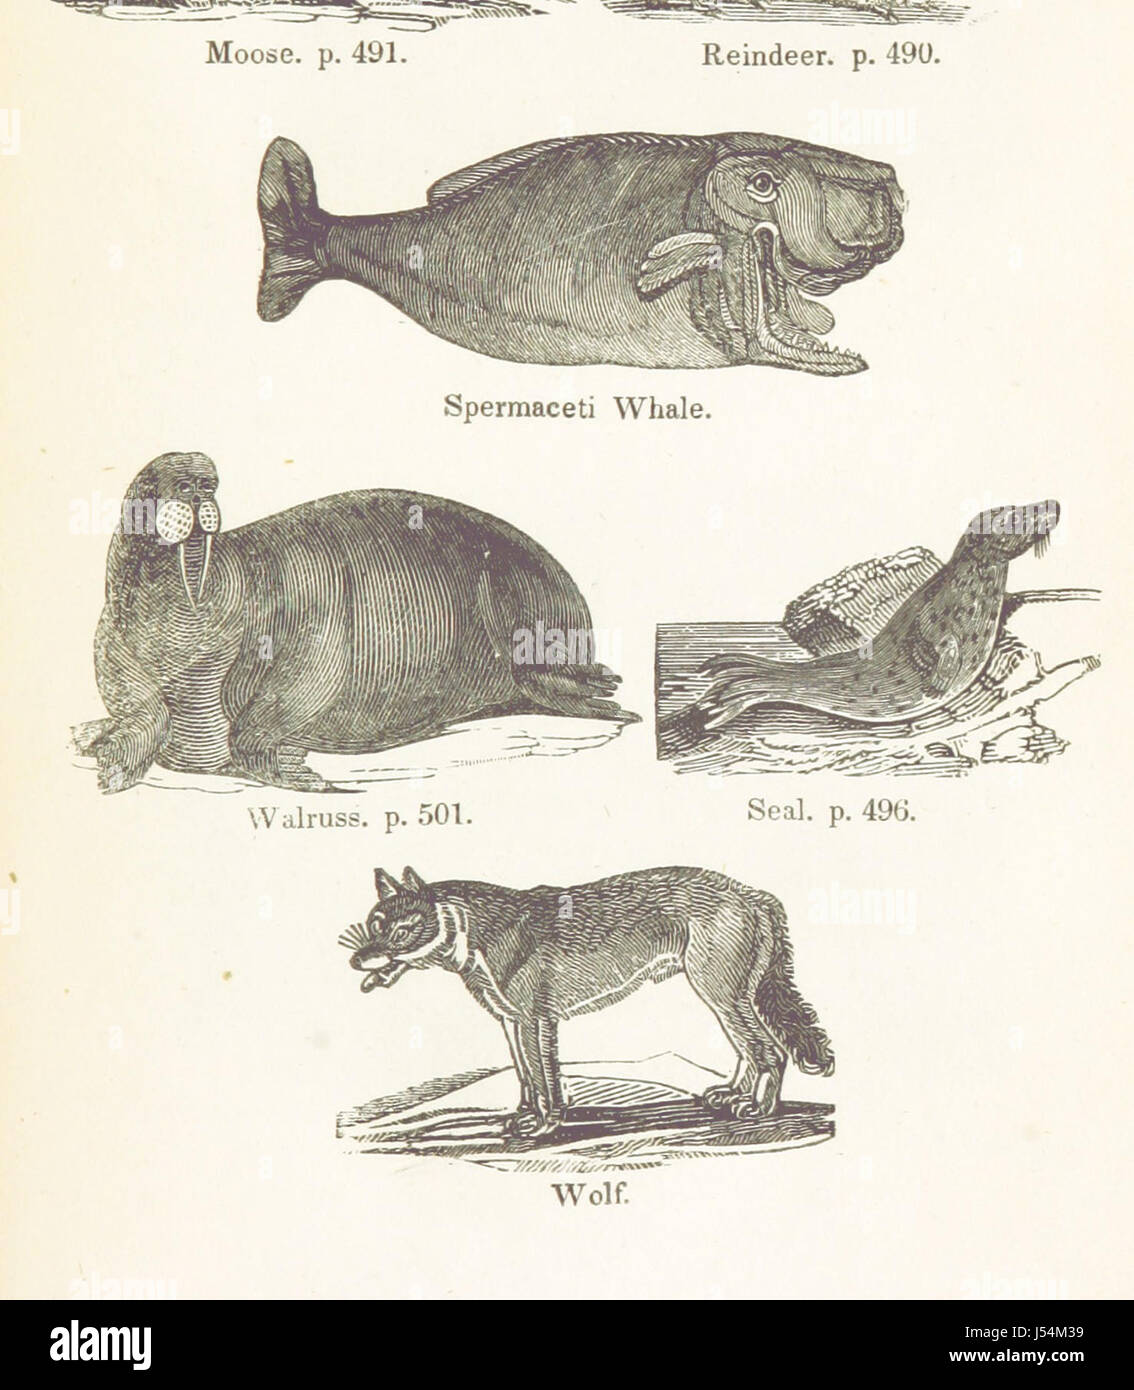 Image taken from page 517 of 'The Polar Regions of the Western Continent explored: embracing a geographical account of Iceland, Greenland, the islands of the frozen sea, and the northern parts of the American Continent ... Together with the adventures, di Stock Photo